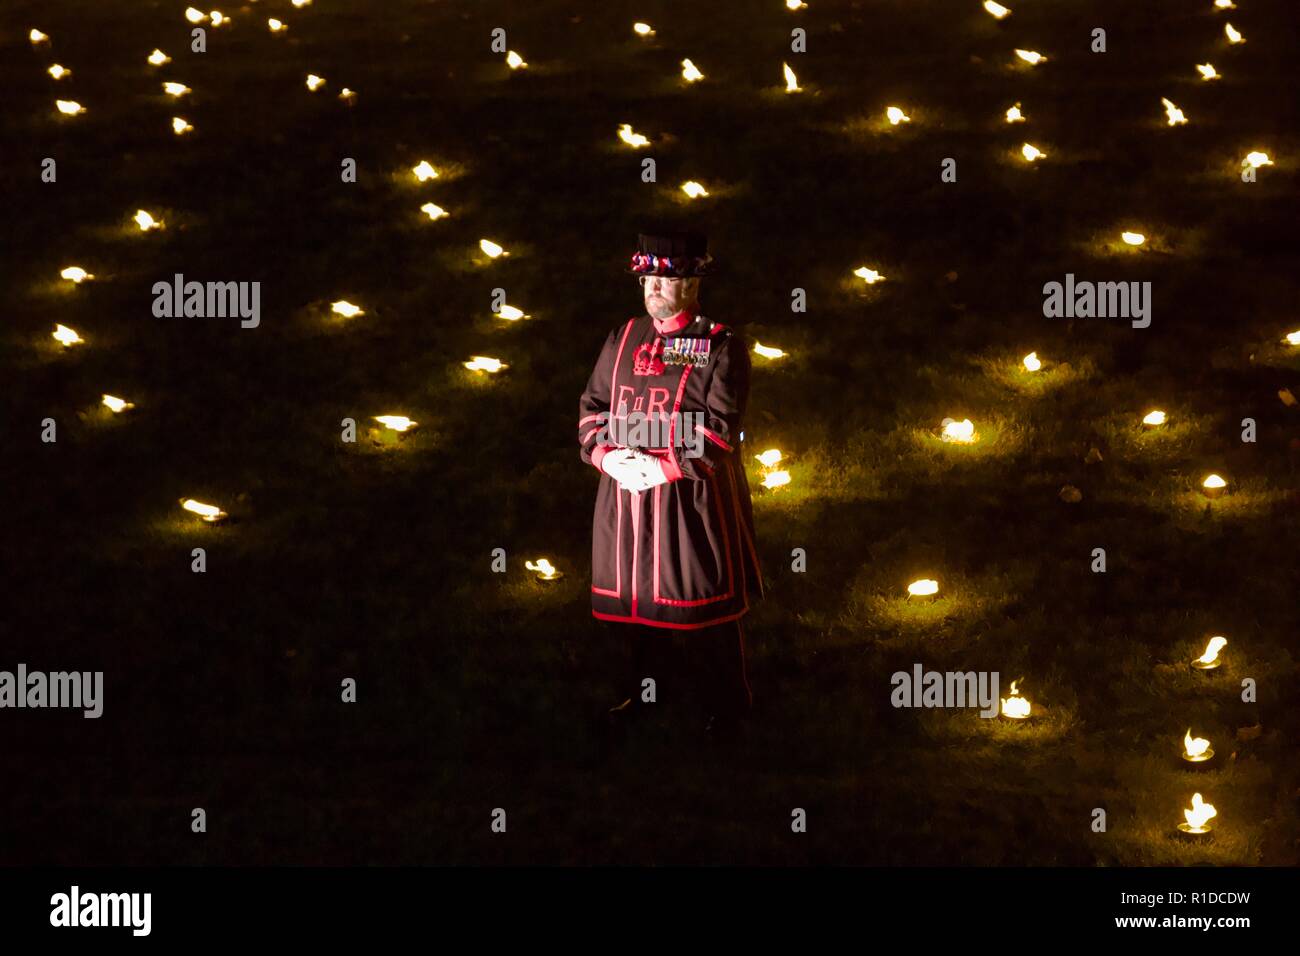 London, UK. 11th November 2018. Beefeater standing in the Tower of London moat. Beyond the Deepening Shadow is an installation where 10000 flames are lit for Rememberance Sunday. Credit: Dimple Patel/Alamy Live News Stock Photo